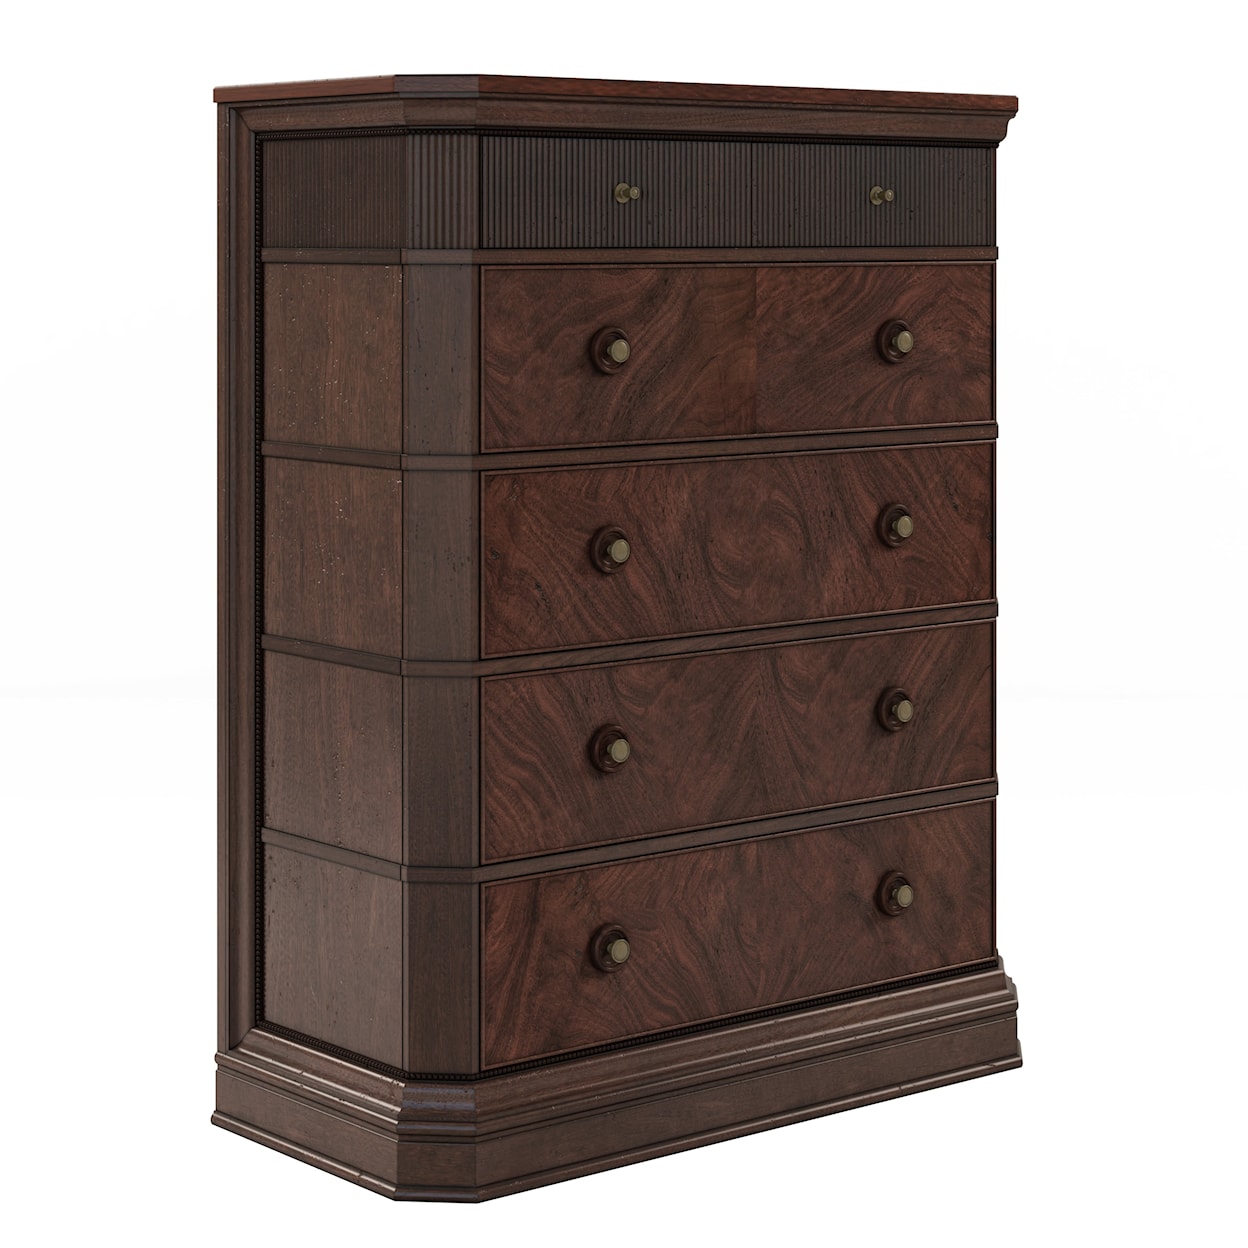 A.R.T. Furniture Inc 328 - Revival Drawer Chest